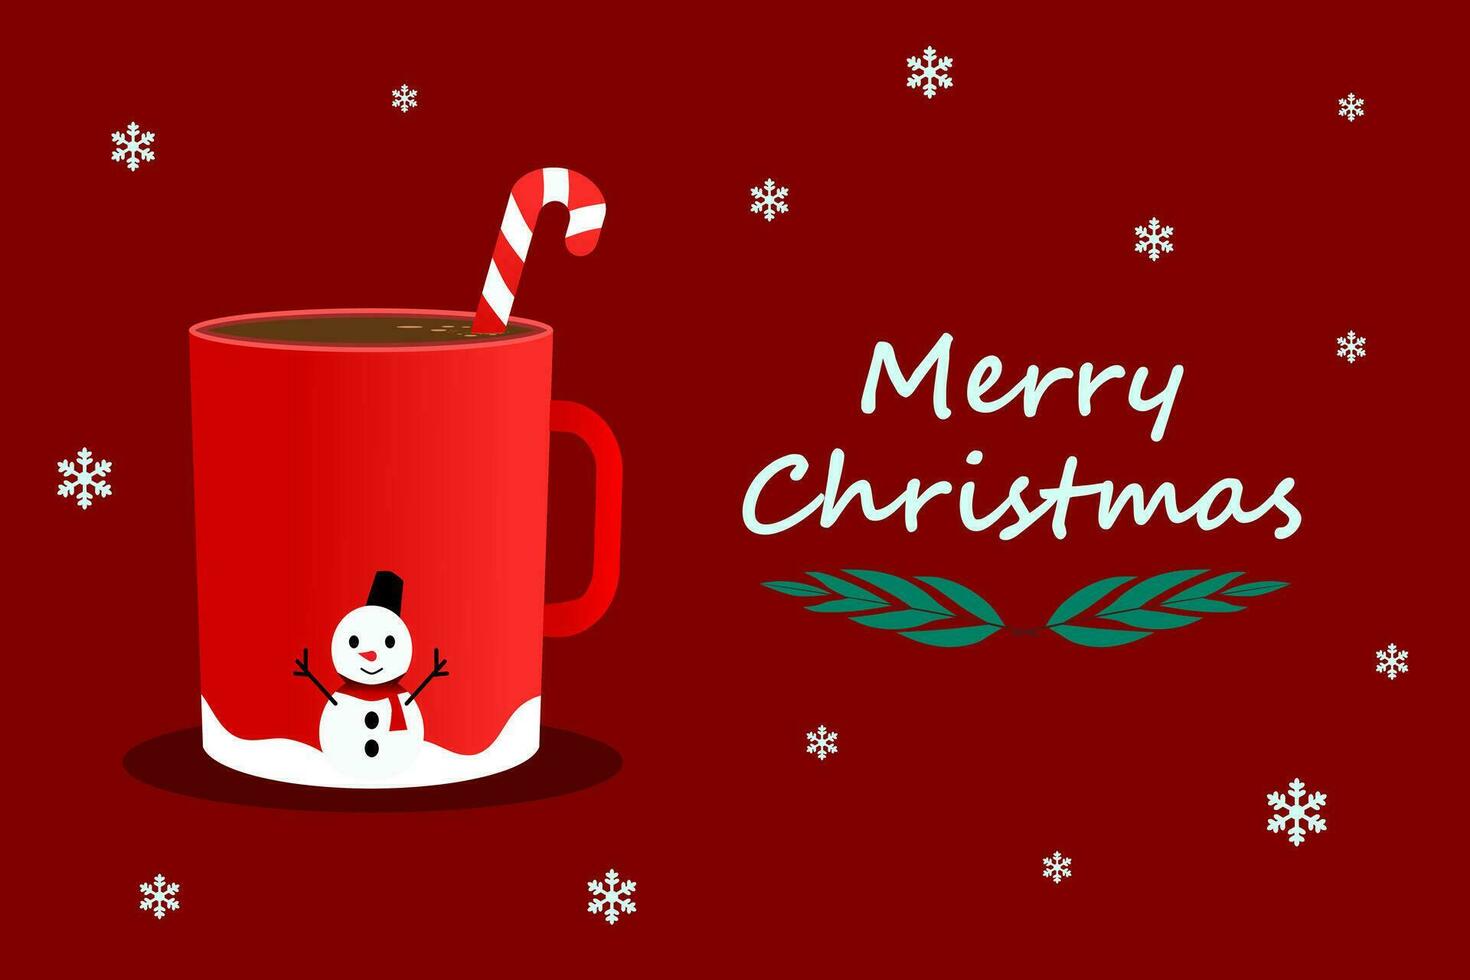 A cup of coffee with Christmas candy stick and snow on red background. Hot drink smell of Christmas. Vector illustration.